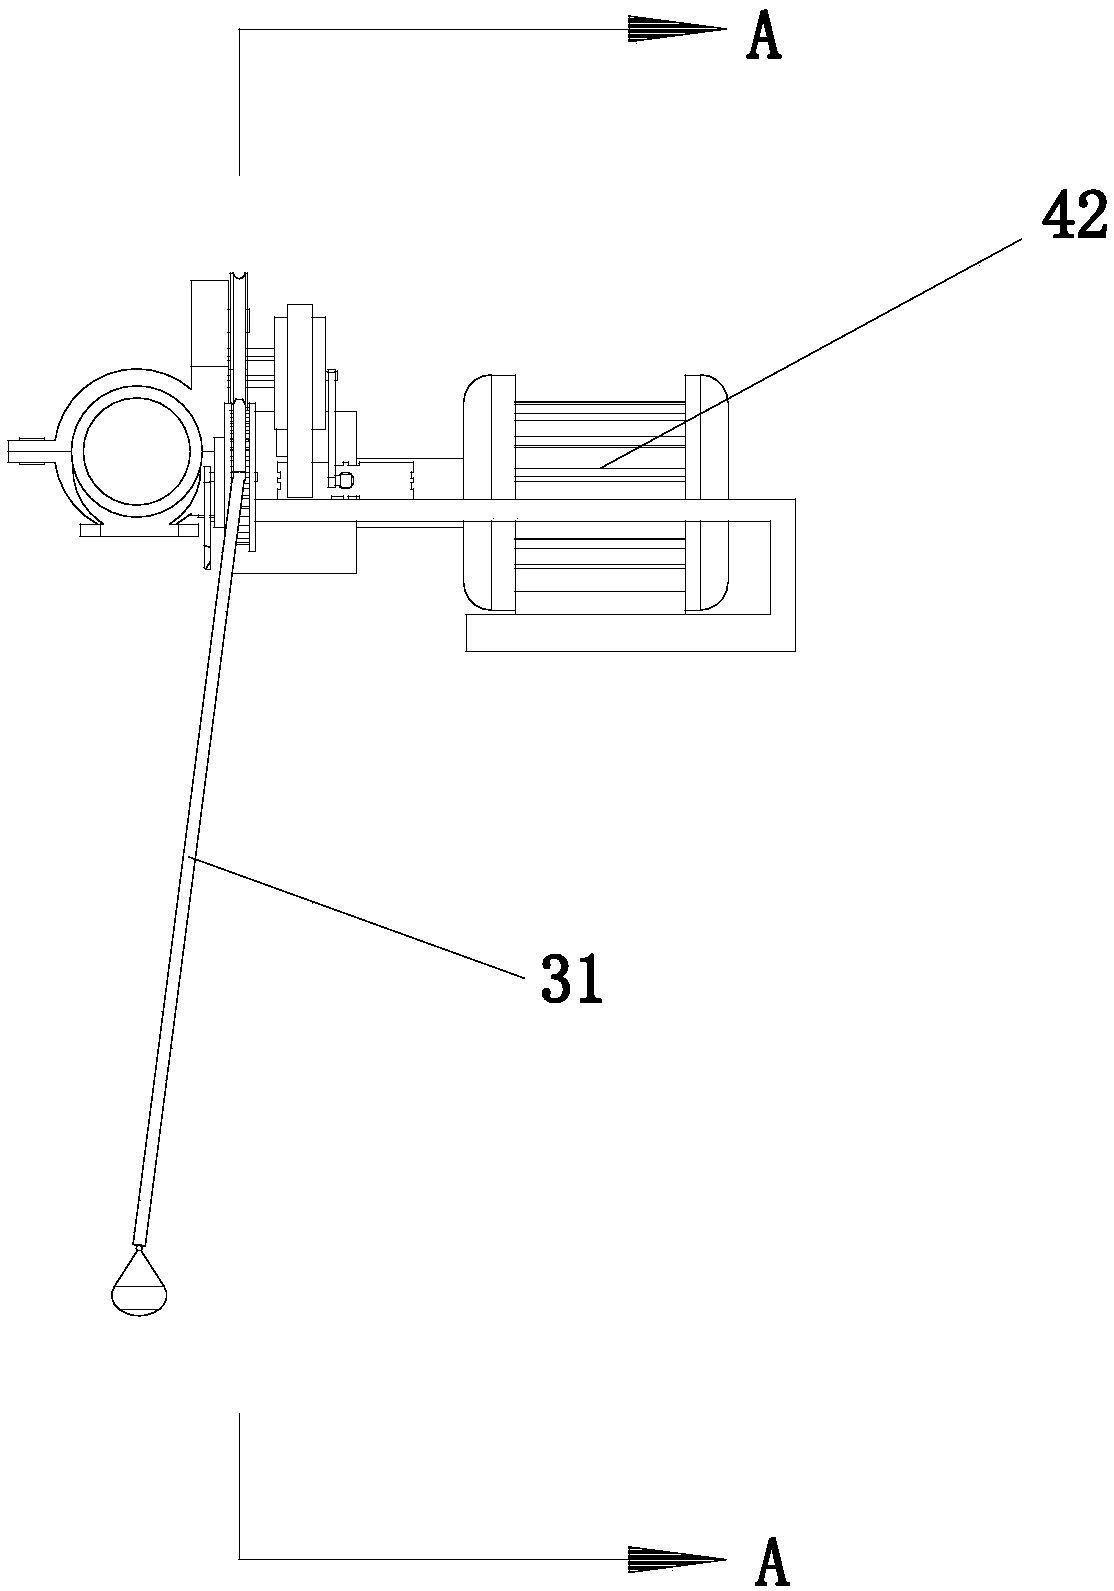 Distribution system capable of automatically controlling discharge of dispensers